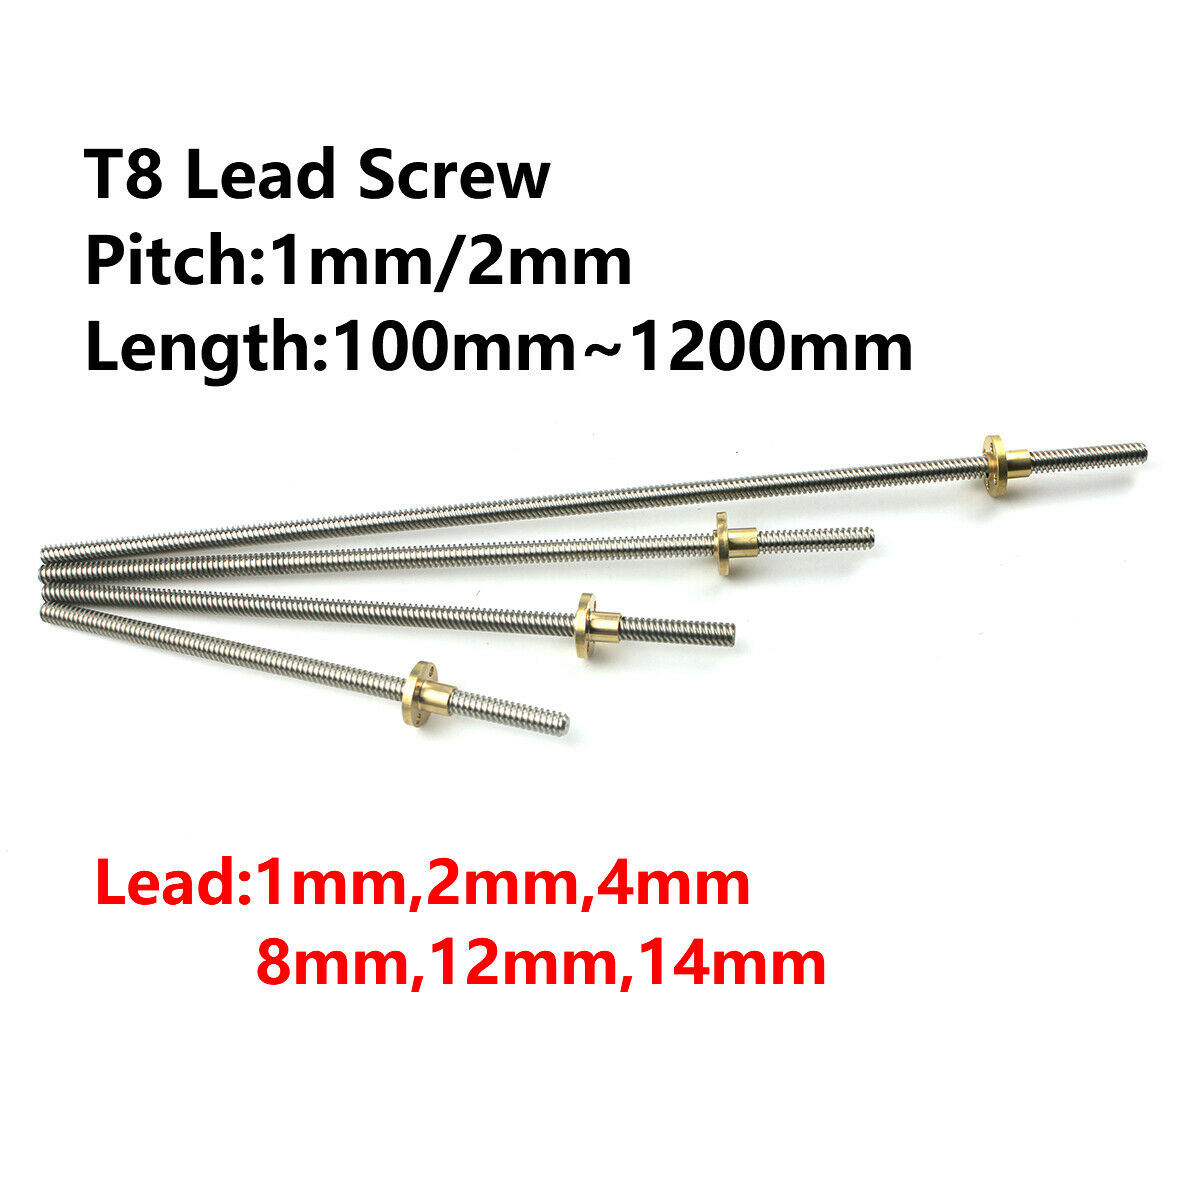 T8 Lead Screw Pitch 1mm/2mm Lead 1/2/4/8/12/14mm Rod Stainless With Brass Nut